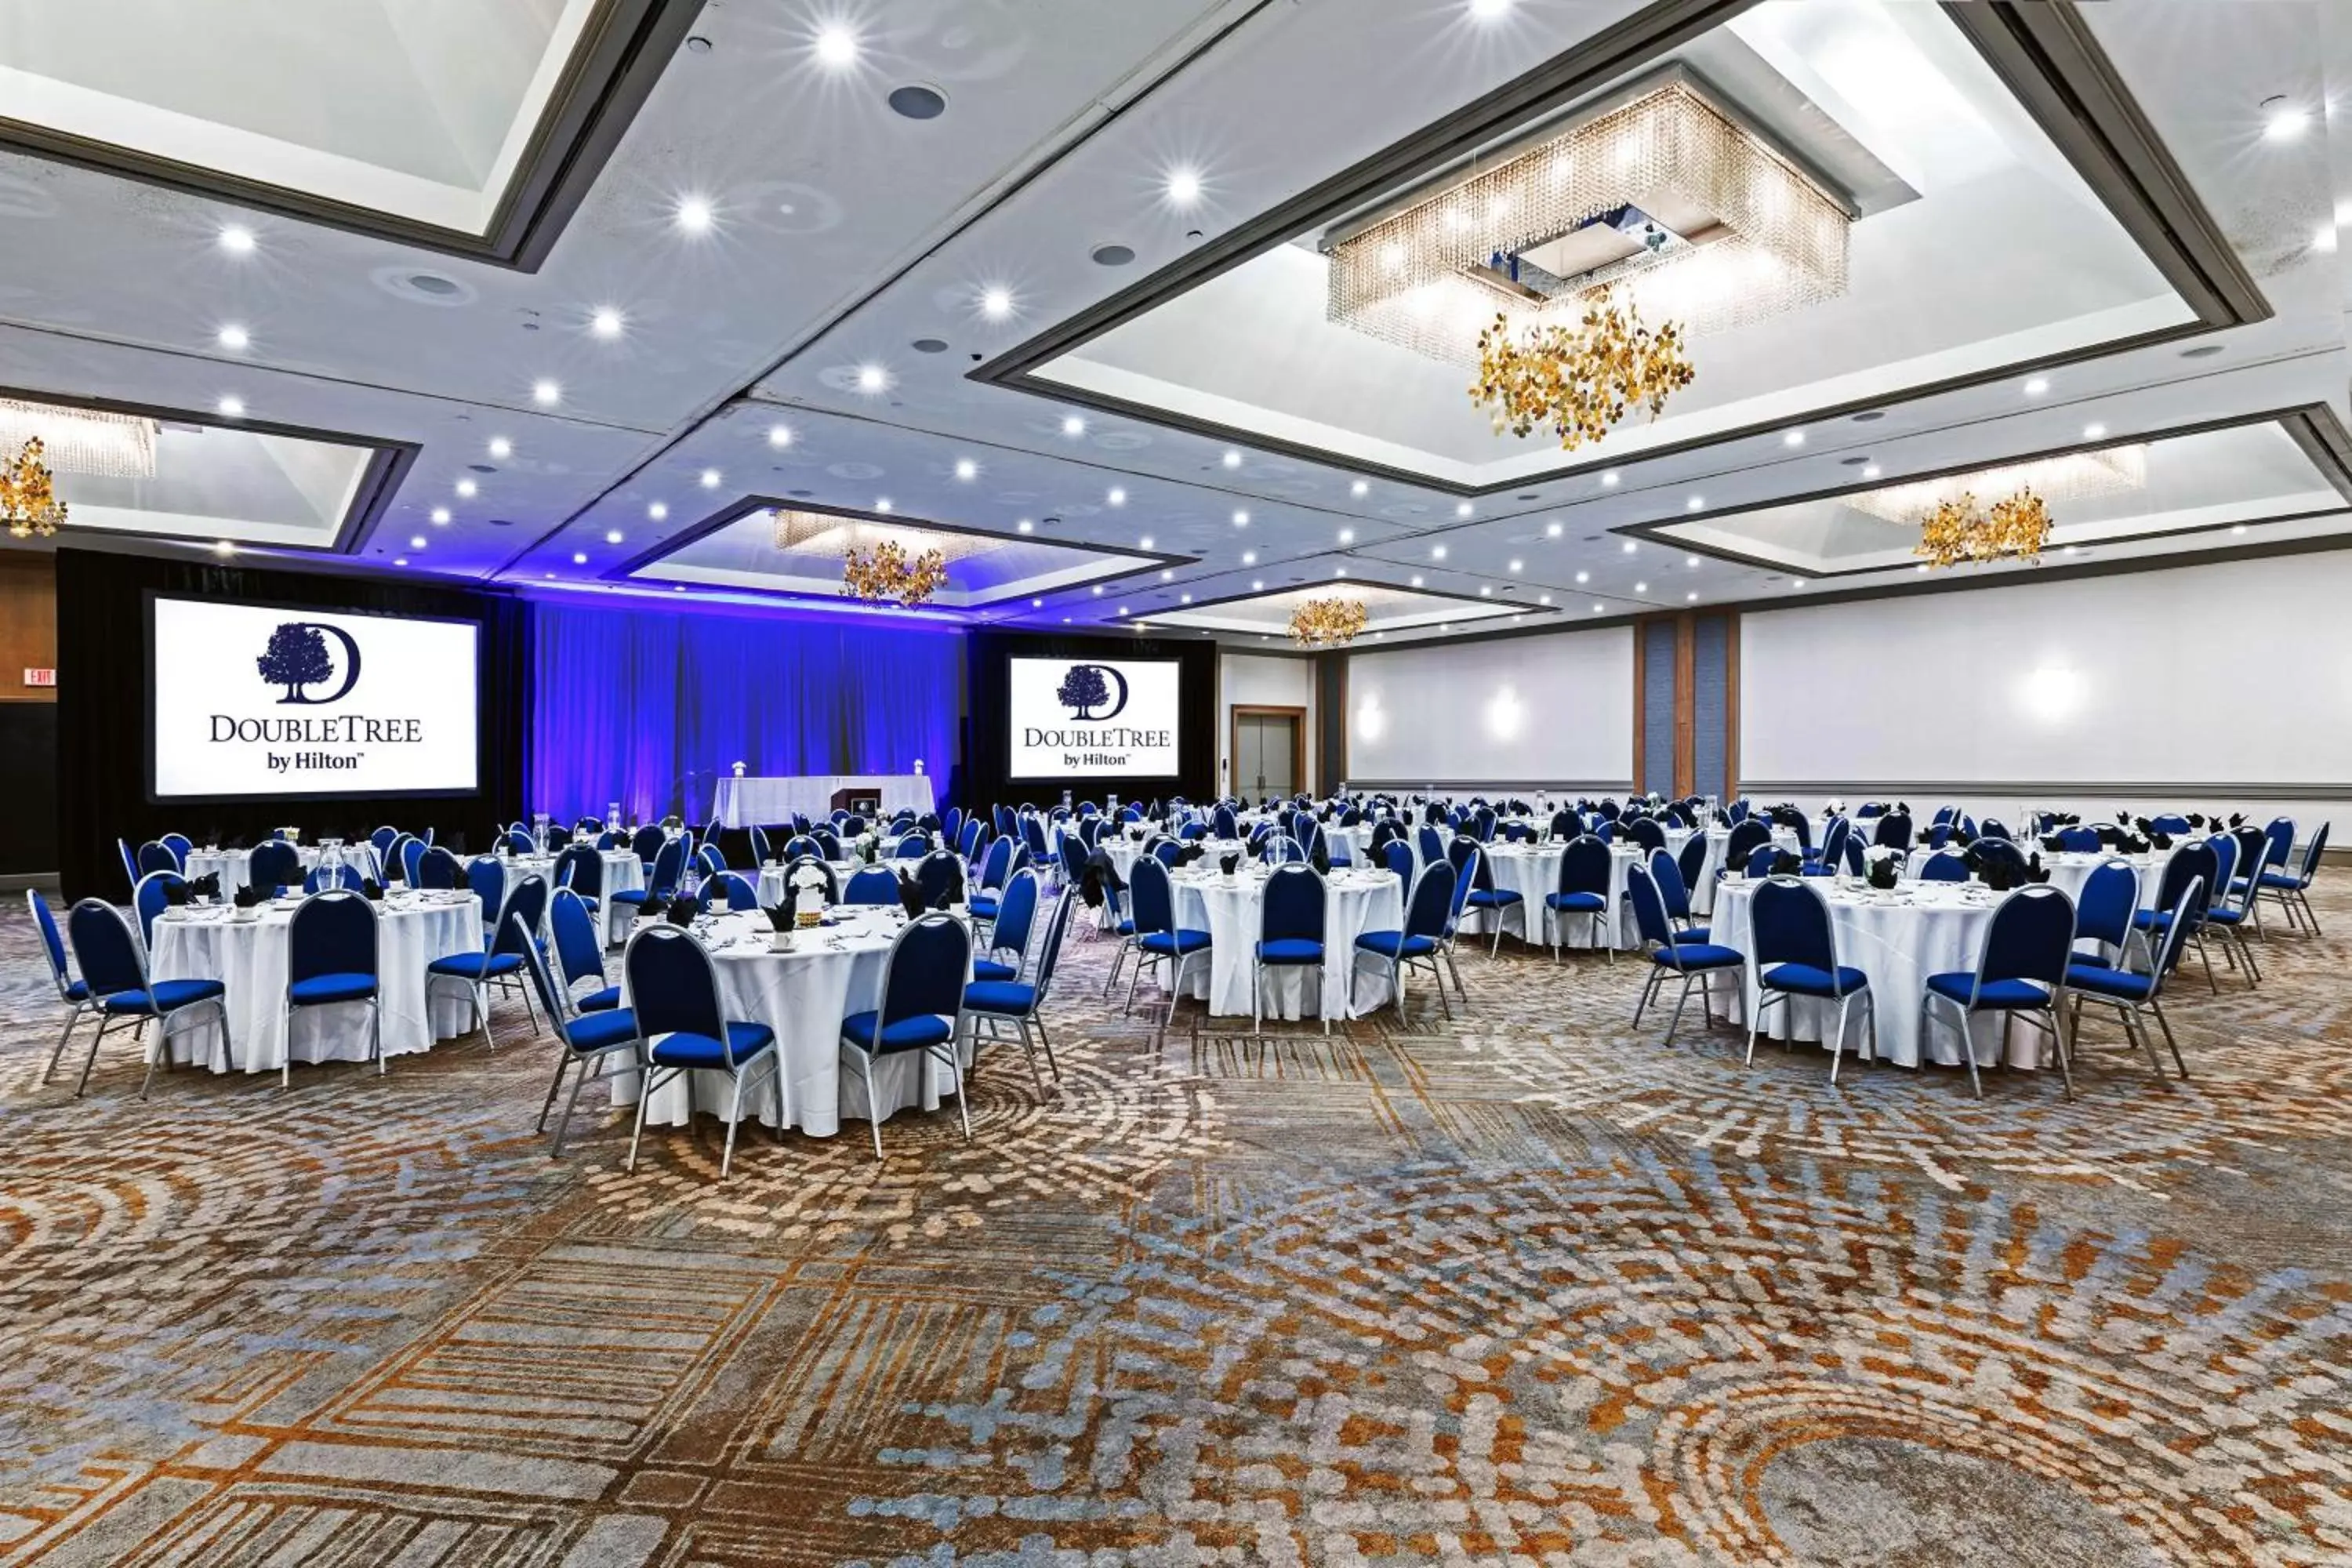 Meeting/conference room, Banquet Facilities in DoubleTree by Hilton Tulsa at Warren Place